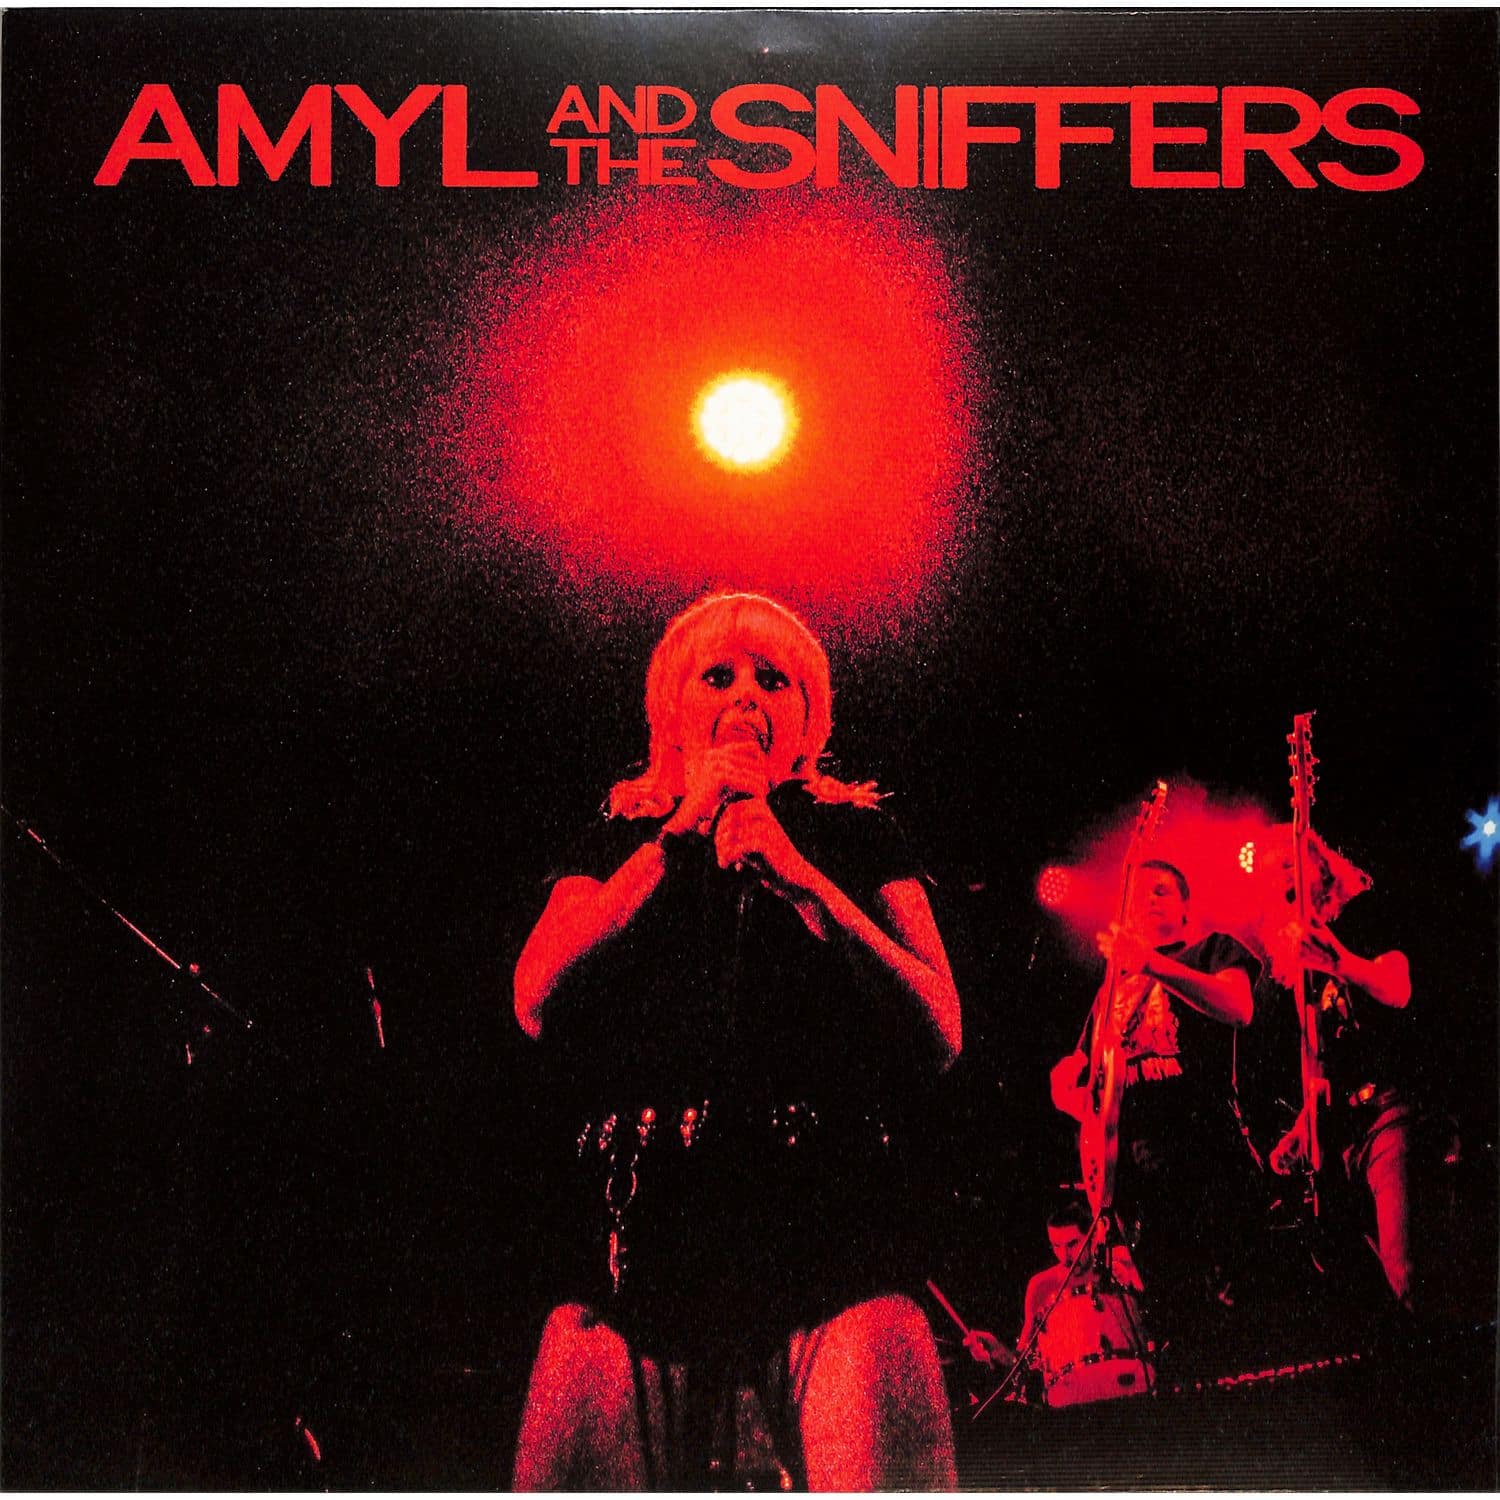 Amyl And The Sniffers - BIG ATTRACTION & GIDDY UP 